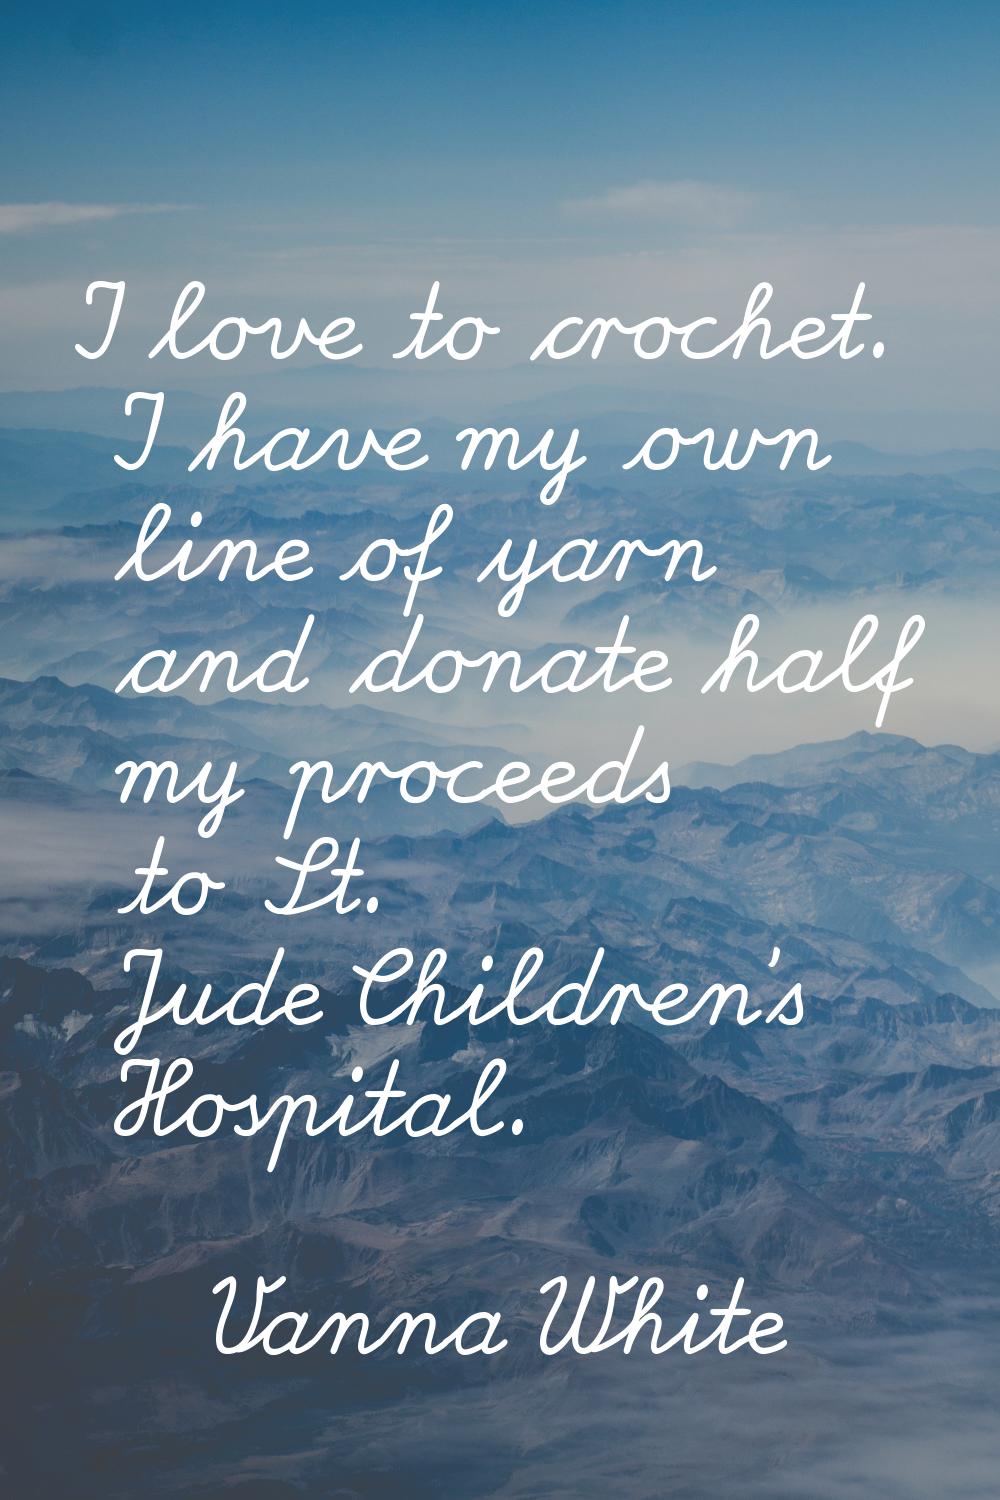 I love to crochet. I have my own line of yarn and donate half my proceeds to St. Jude Children's Ho